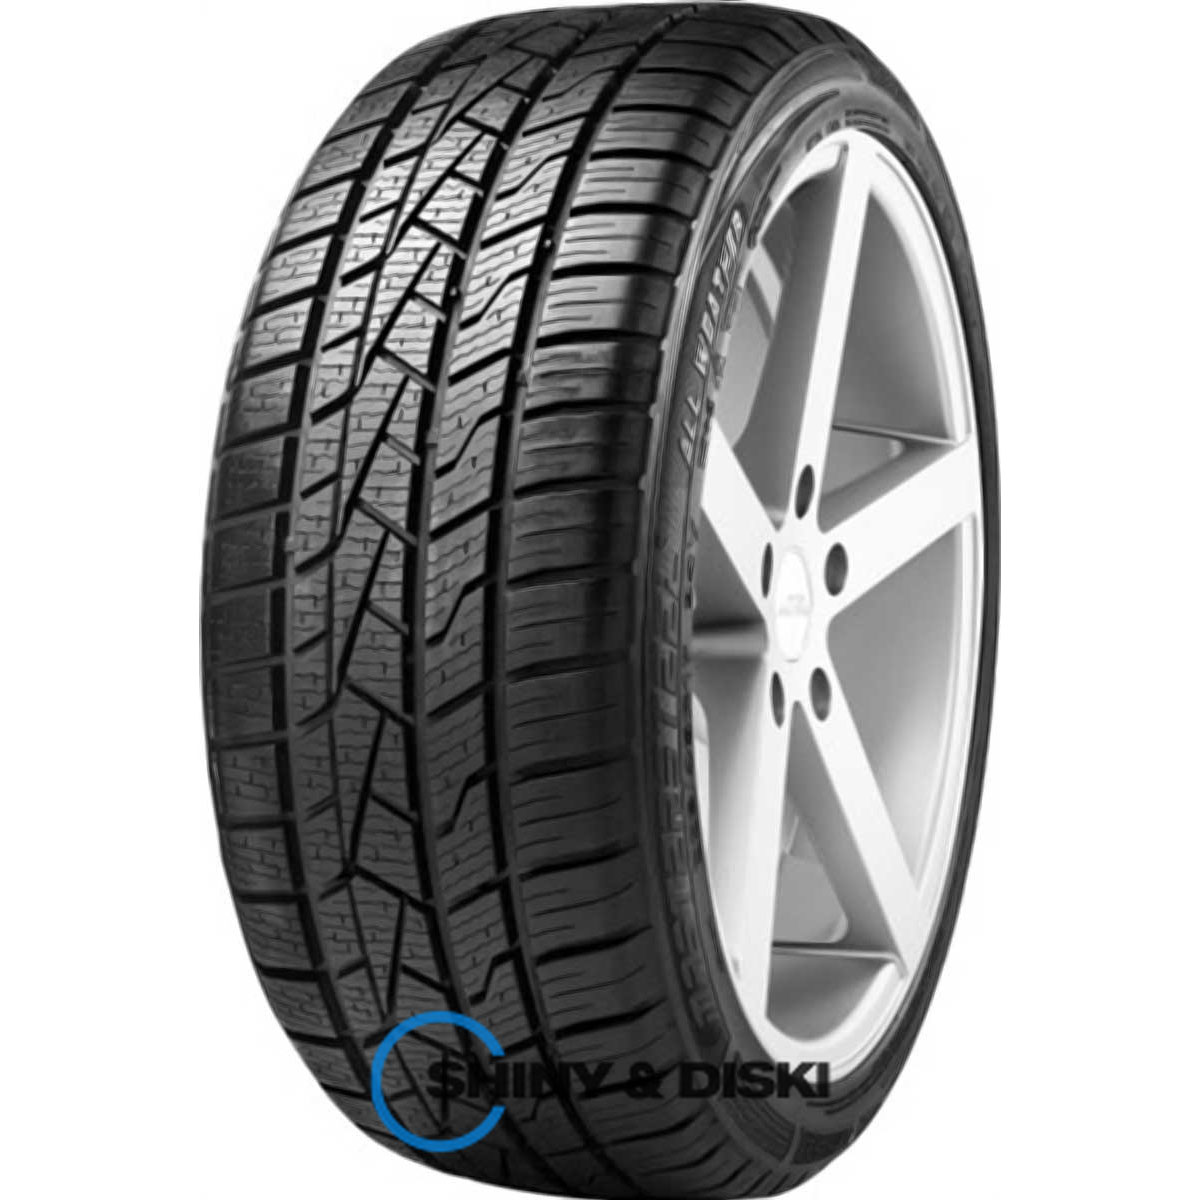 mastersteel all weather 235/45 r17 97w